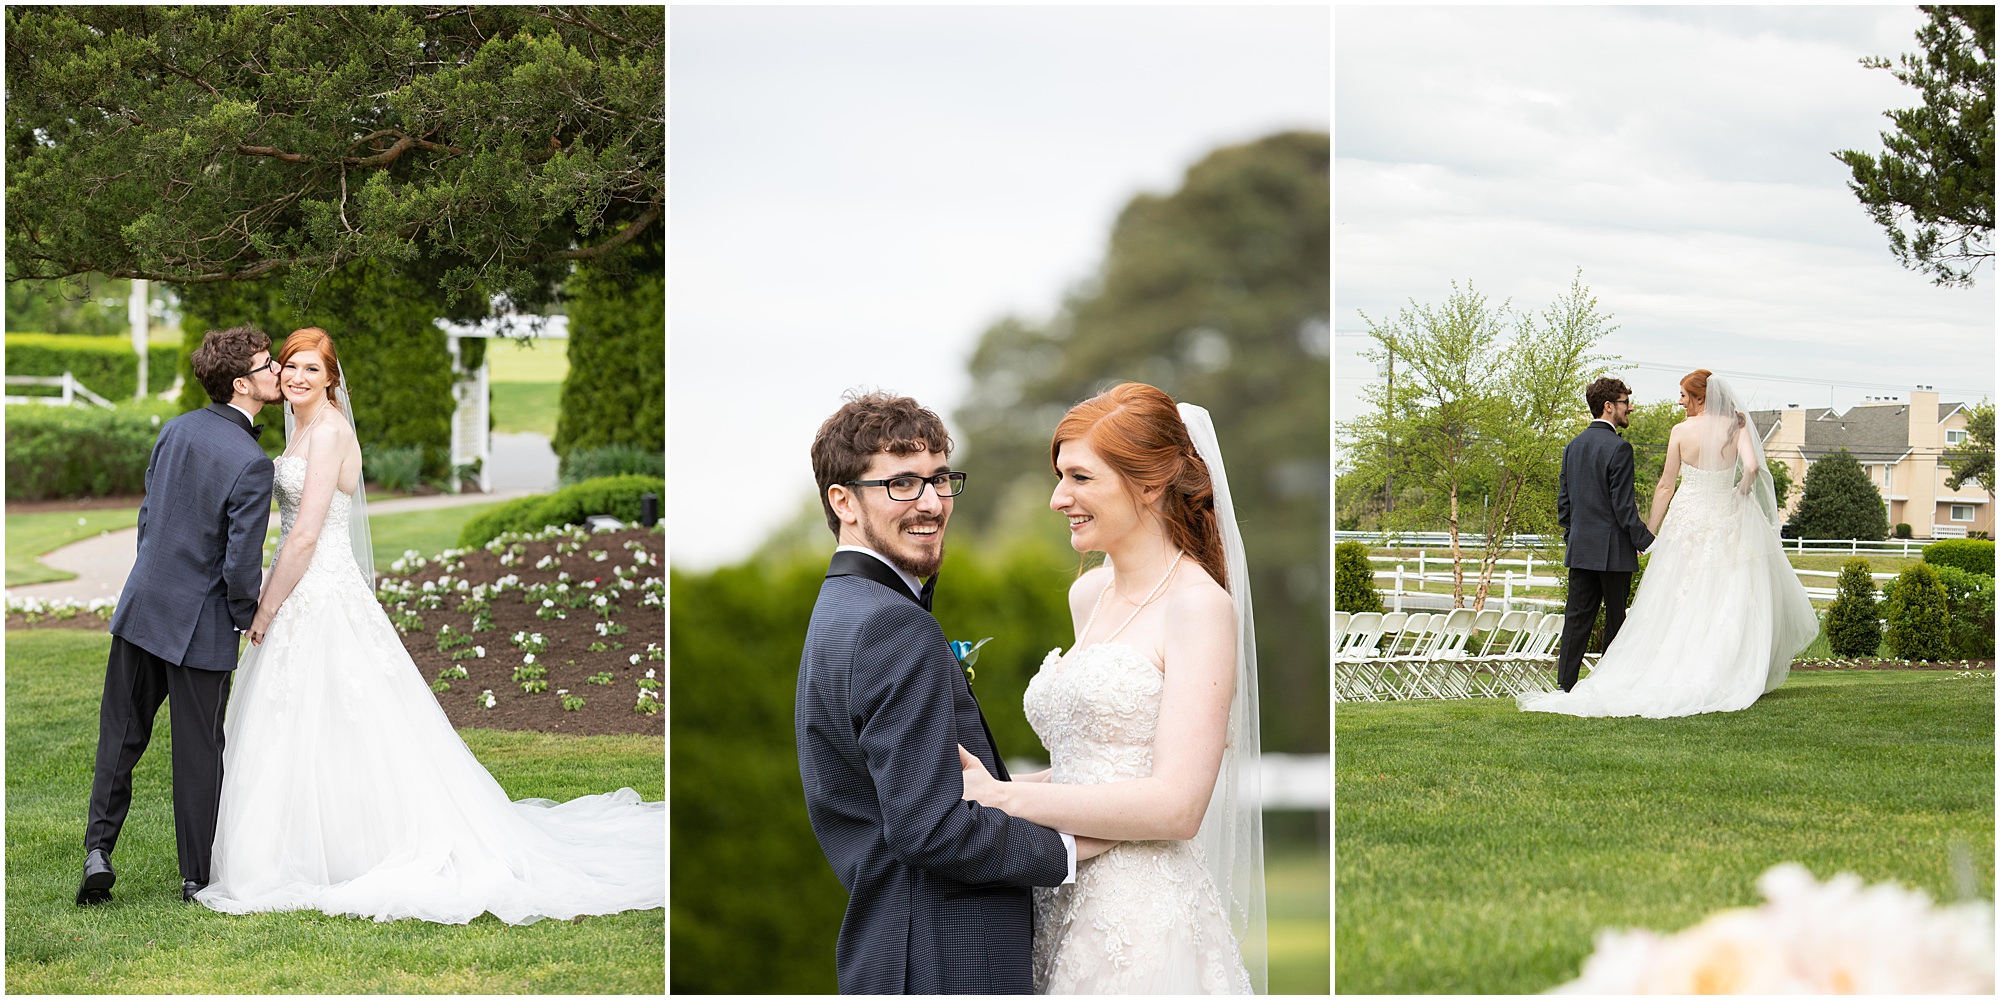 Greate Bay Country Club wedding in SomerS Point, NJ